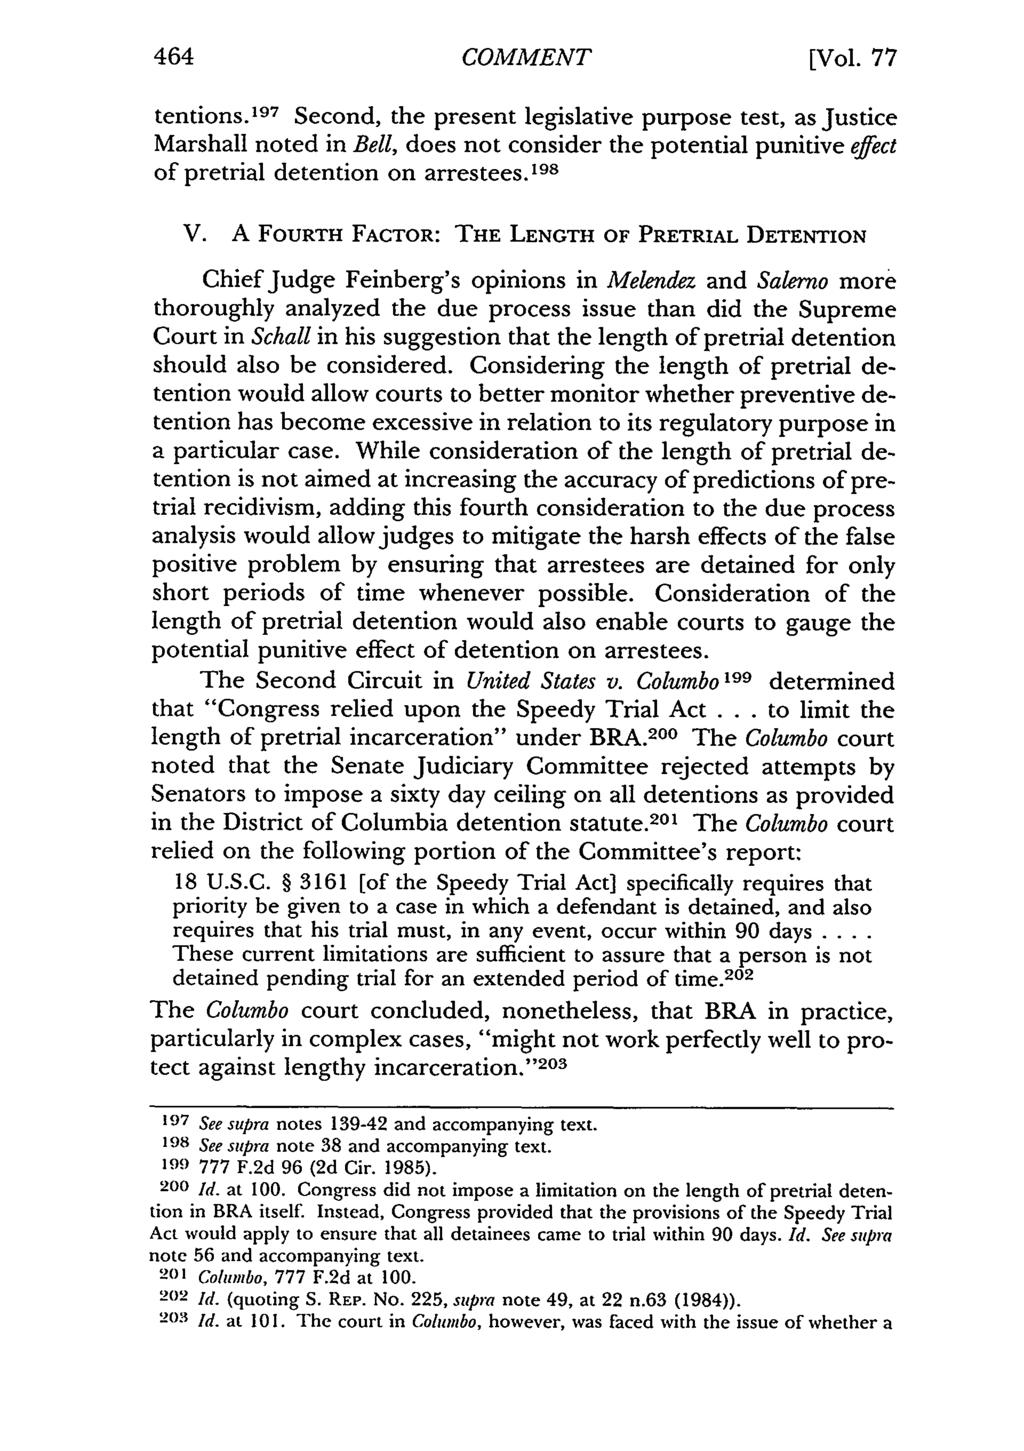 464 COMMENT [Vol. 77 tentions. 197 Second, the present legislative purpose test, as Justice Marshall noted in Bell, does not consider the potential punitive effect of pretrial detention on arrestees.